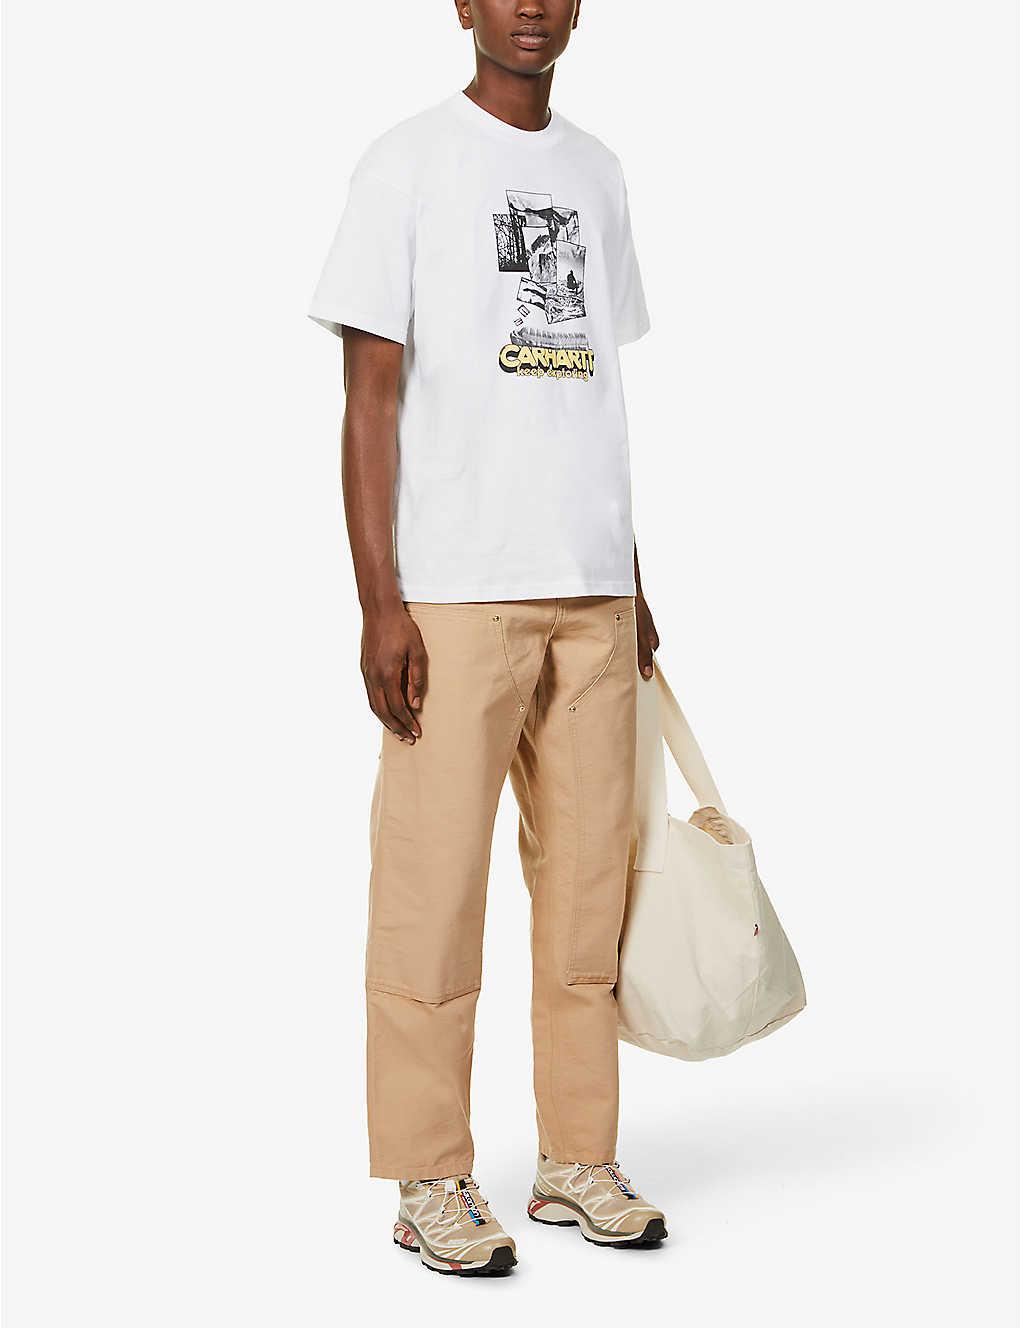 Carhartt WIP Keep Exploring Graphic-print Organic Cotton T-shirt in White  for Men - Lyst